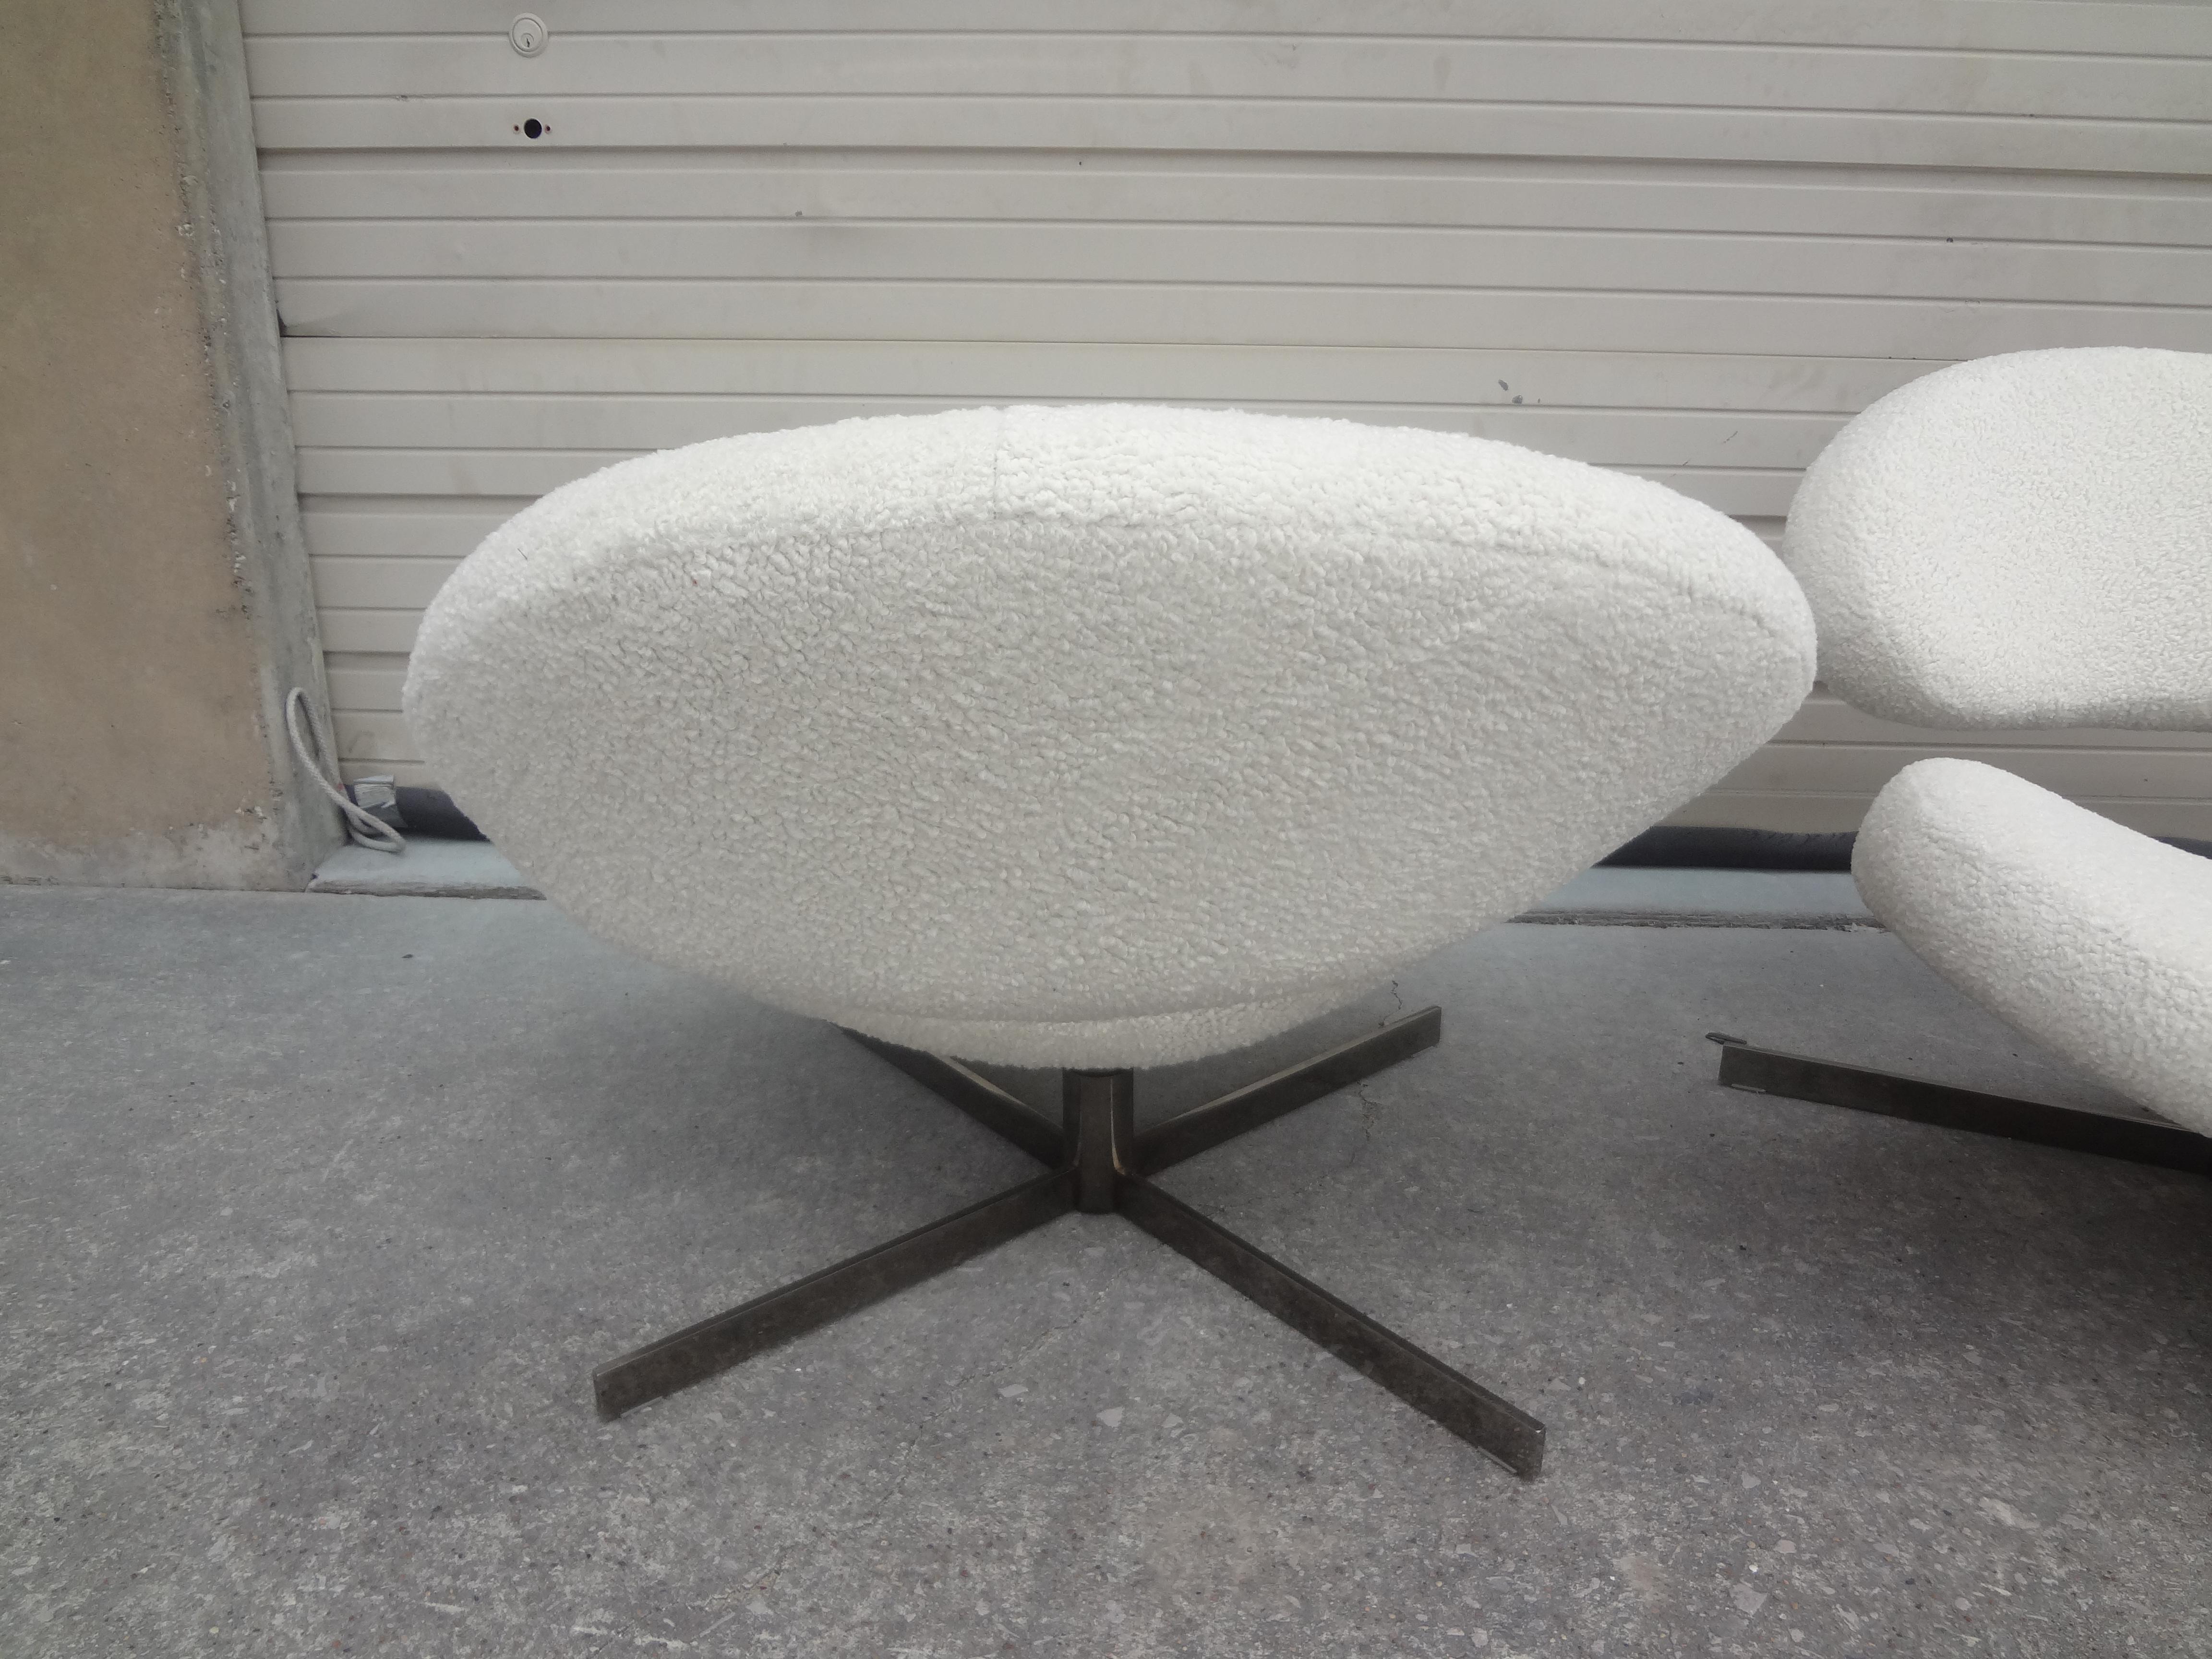 Pair of French Modernist Sculptural Swivel Chairs by Roche Bobois For Sale 2